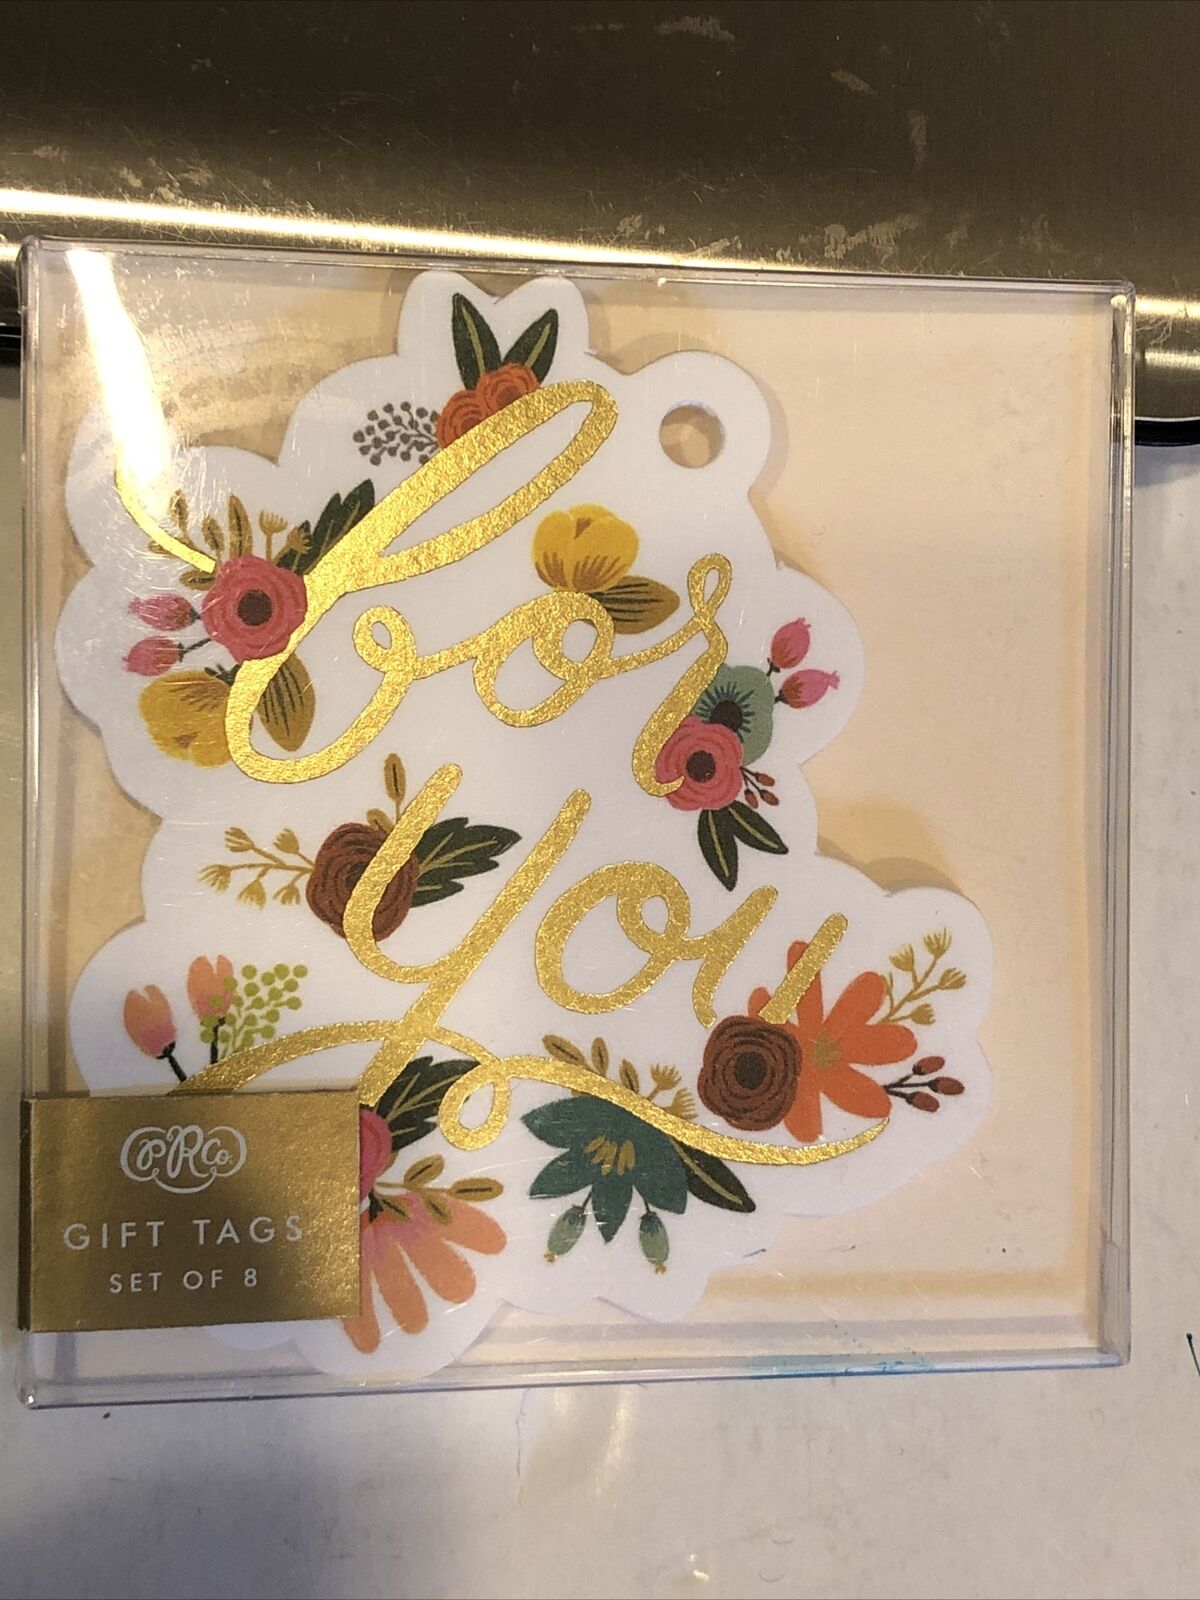 Nwt Rifle Paper Company Gift Tags Set Of 8 “for You” Floral